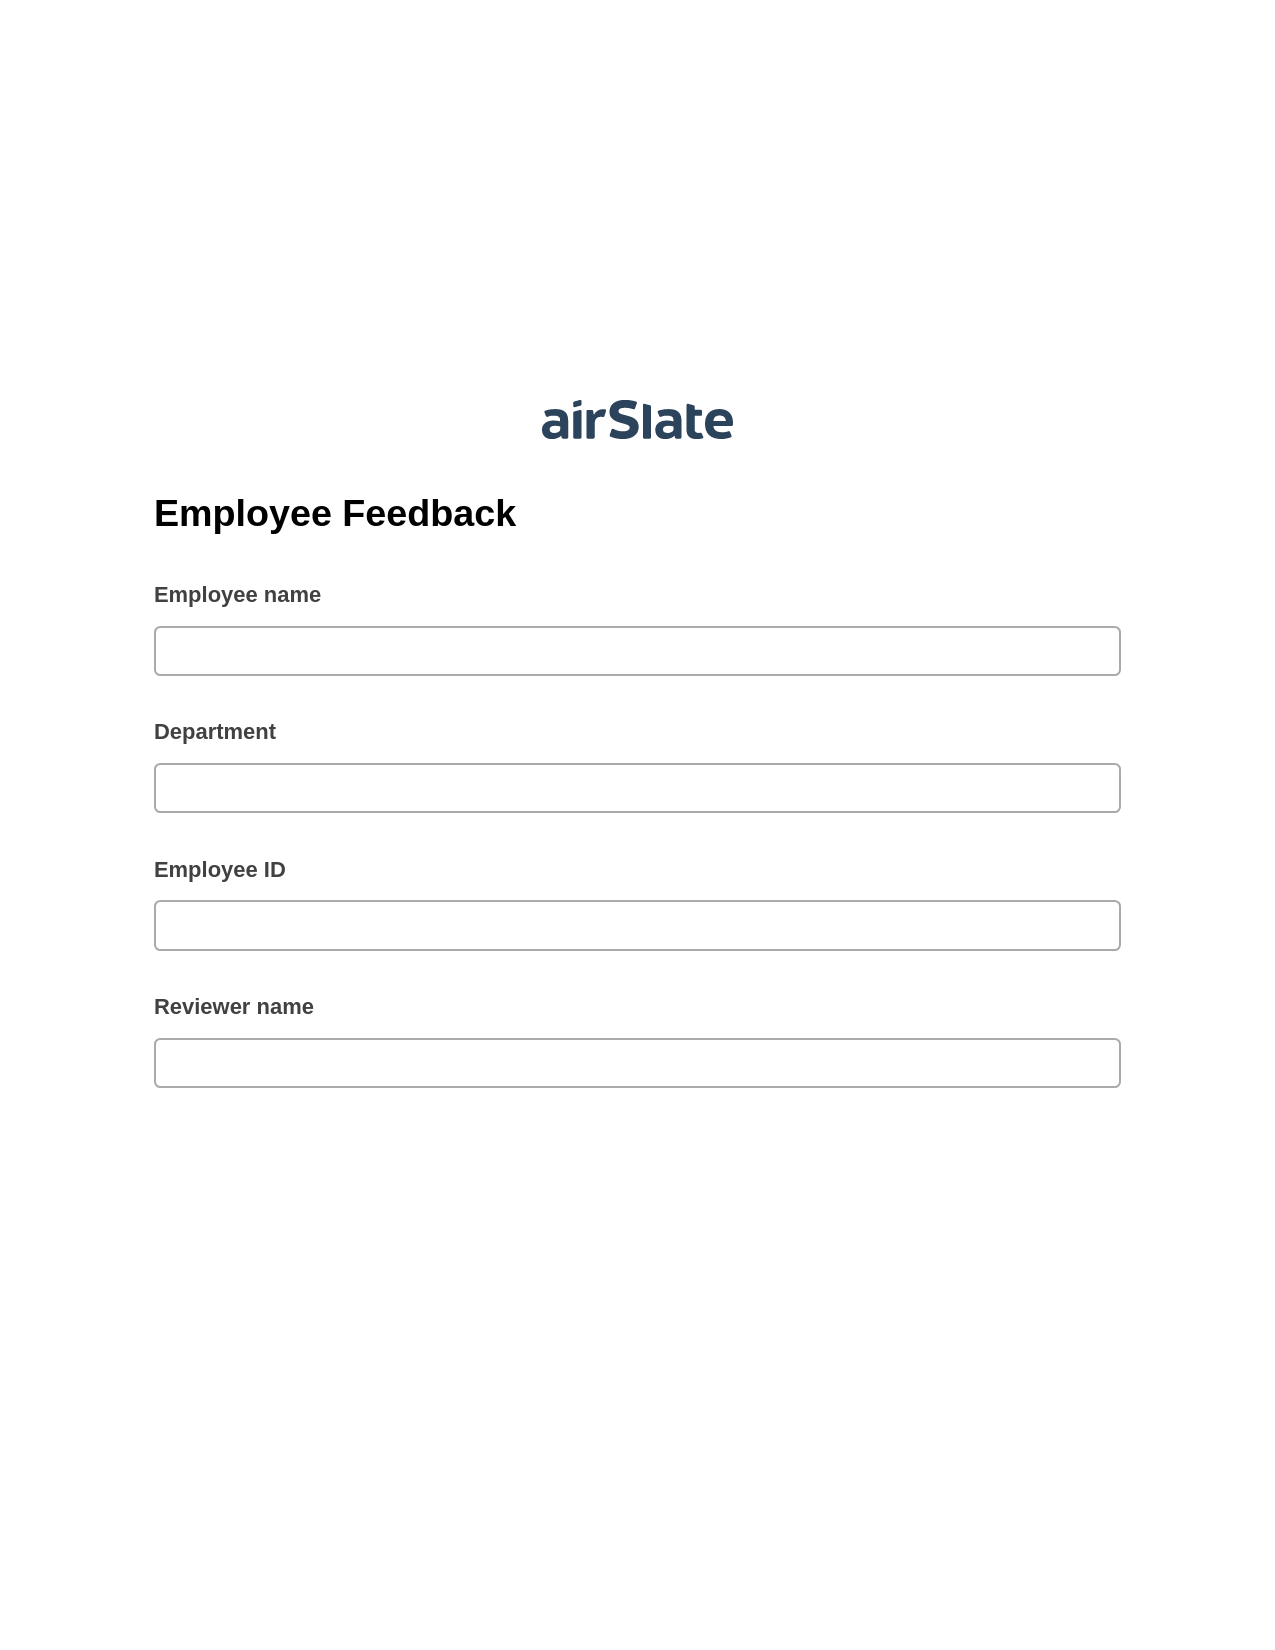 Multirole Employee Feedback Pre-fill from Salesforce Record Bot, Email Notification Bot, Box Bot